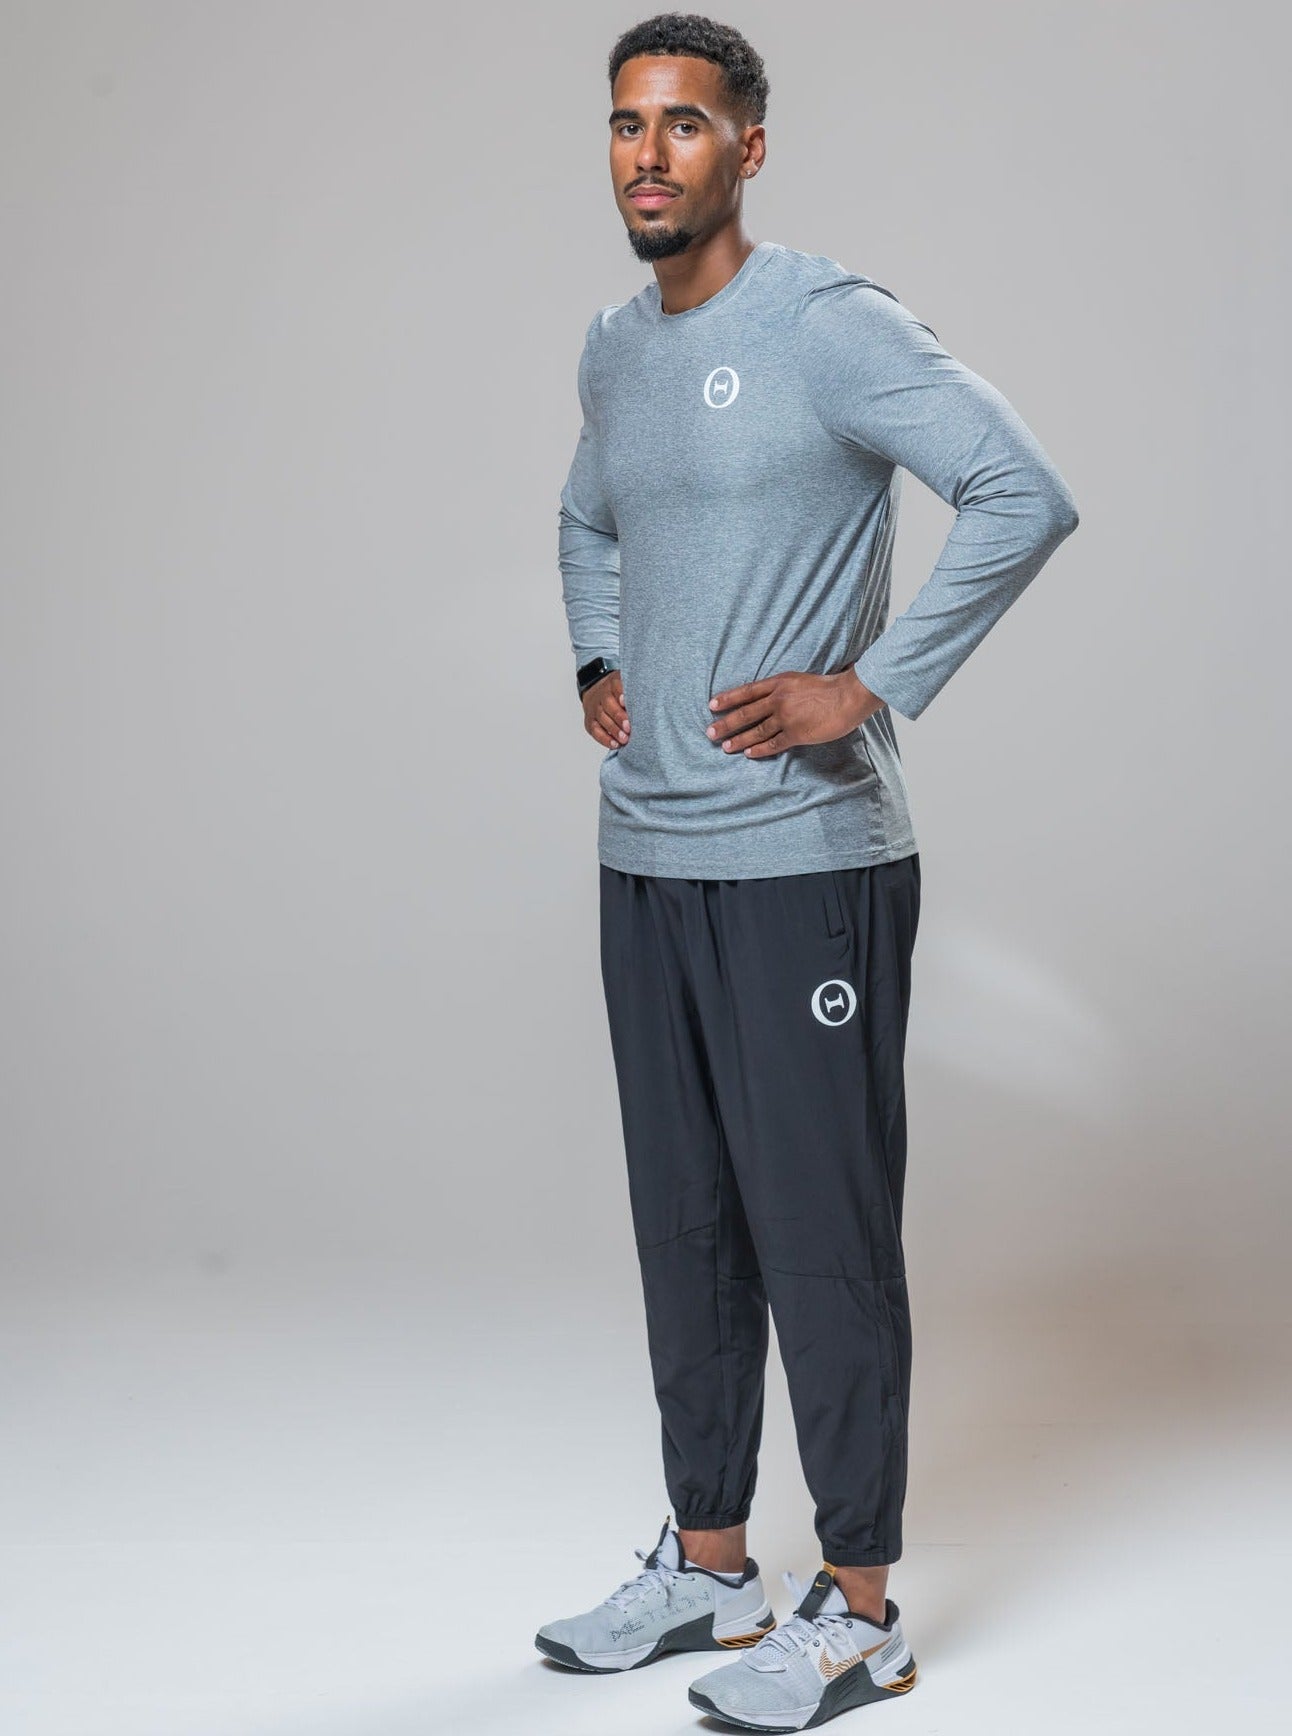 Complete look of our THETA element long sleeve t-shirt and white logo THETA core trackies. Finished with white nike metcon 8's. 